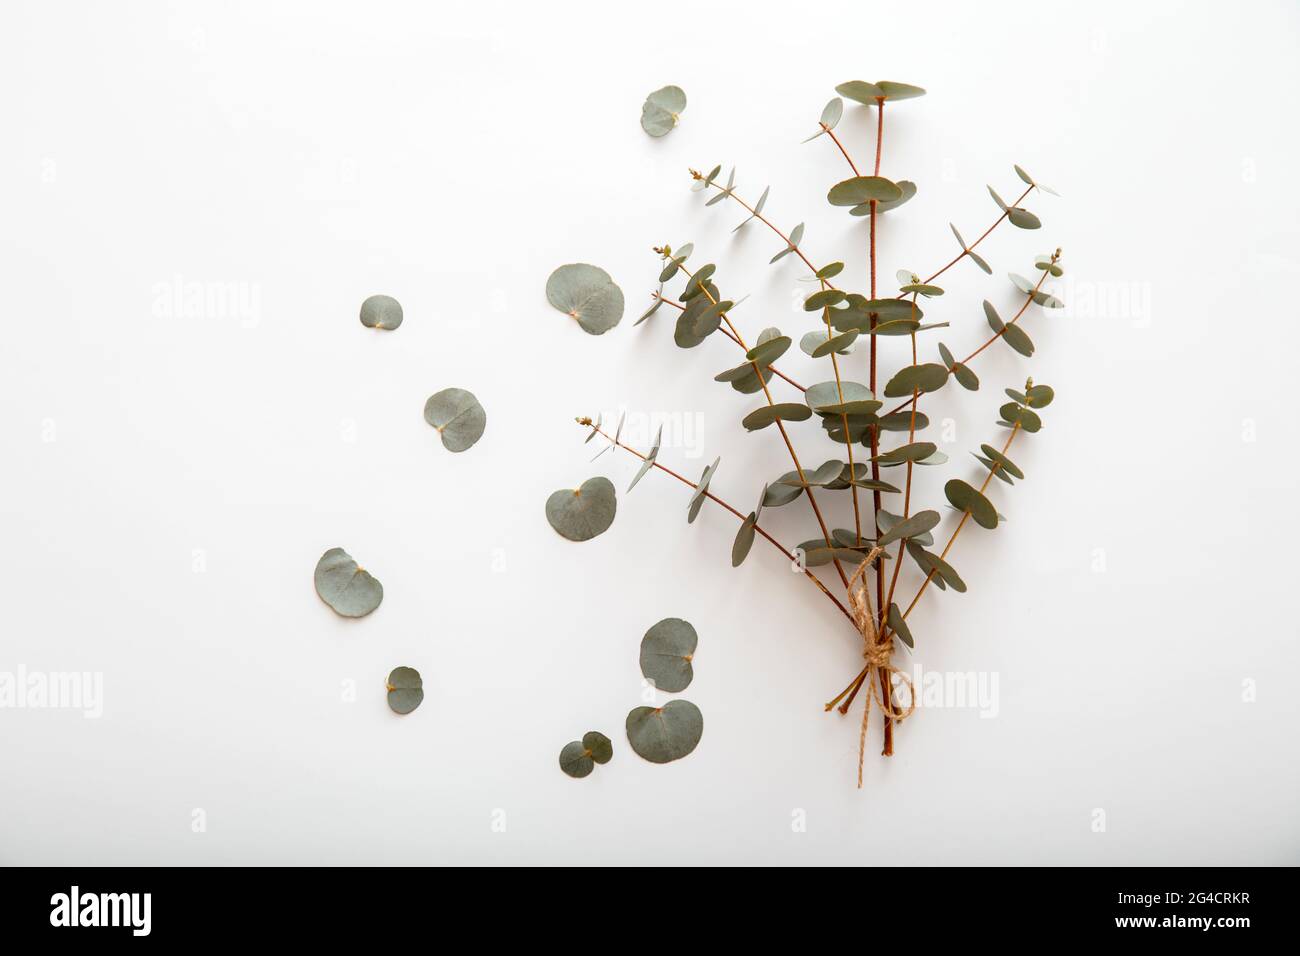 Eucalyptus in bouquet. Bunch of eucalyptus branches tied in bouquet and lies on white background. Top view with copy space. Spring greenery flowers. Stock Photo